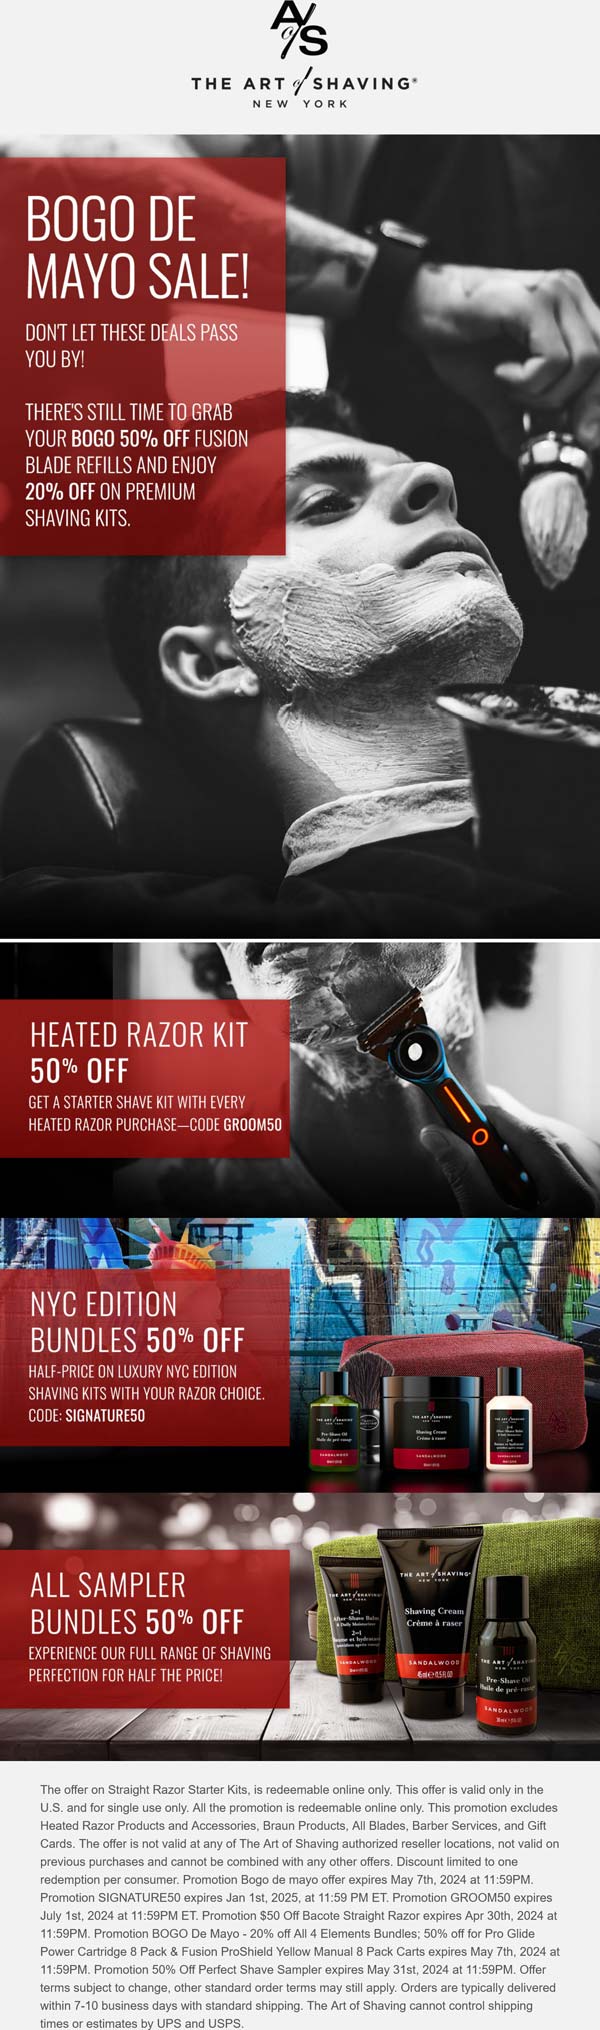 The Art of Shaving stores Coupon  20% off shaving kits & 50% off second Gillette 8pk 5-blades at The Art of Shaving #theartofshaving 